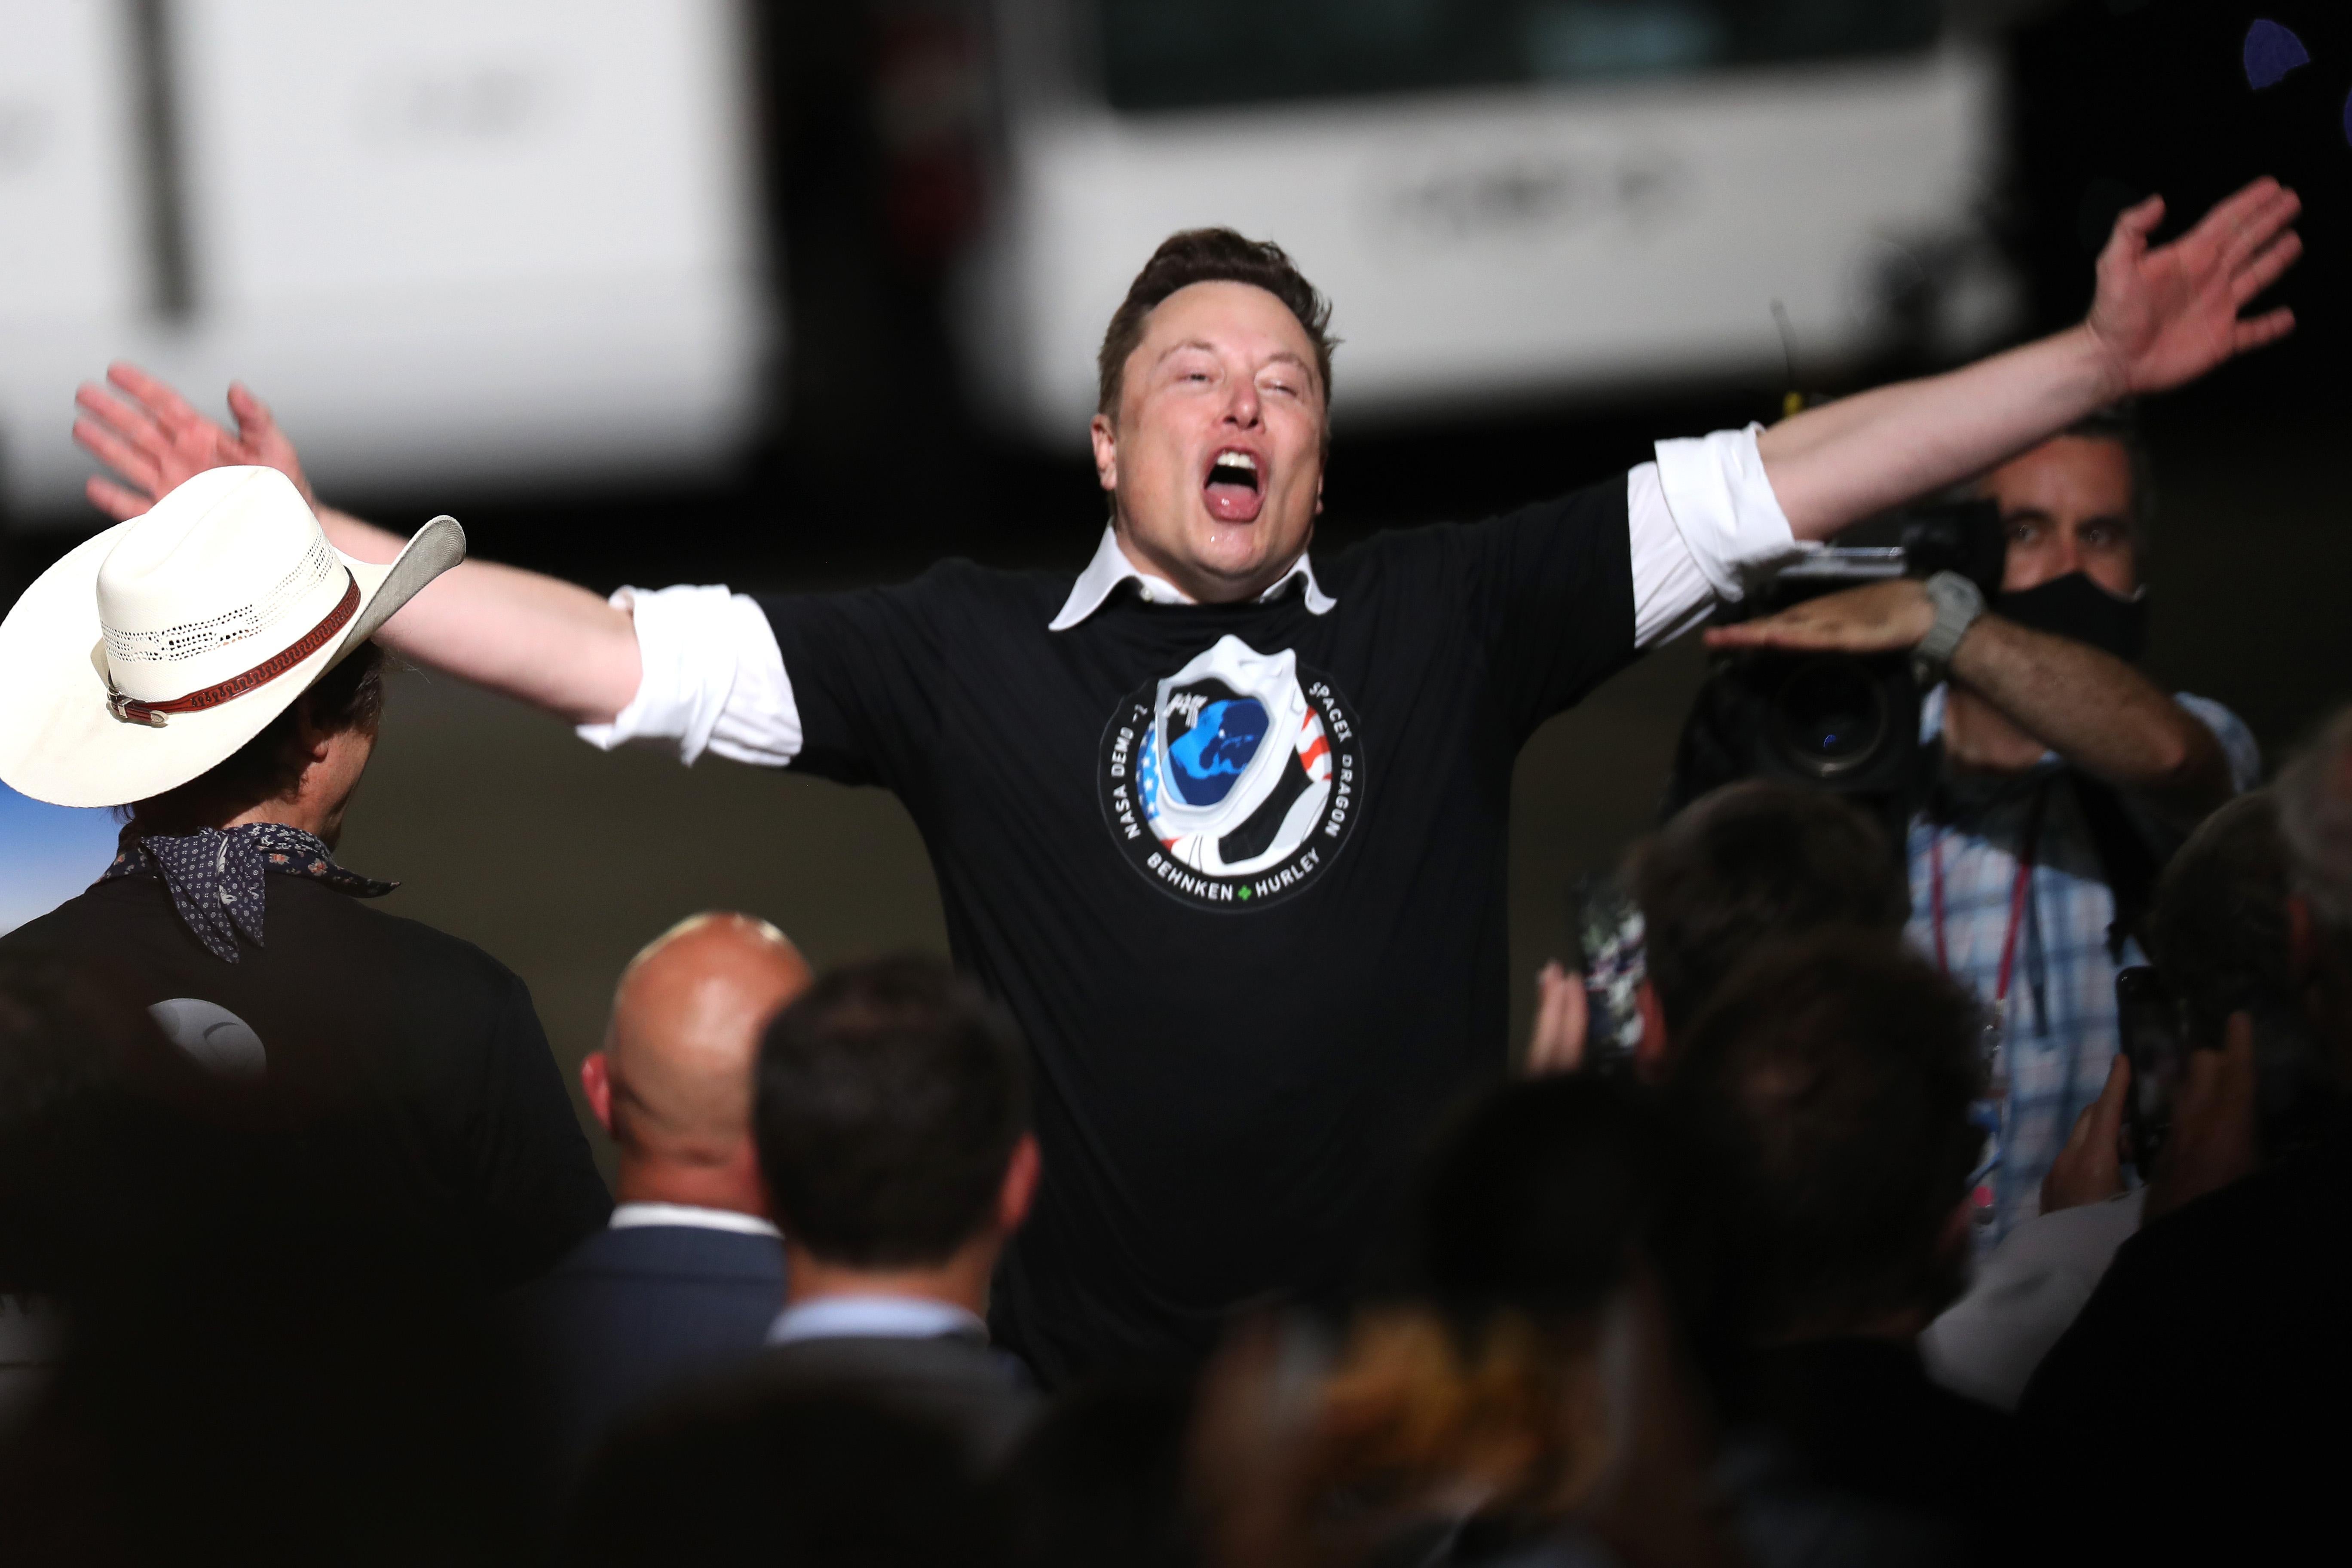 Spacex founder Elon Musk celebrates after the successful launch of the SpaceX Falcon 9 rocket with the manned Crew Dragon spacecraft at the Kennedy Space Center on May 30, 2020 in Cape Canaveral, Florida.